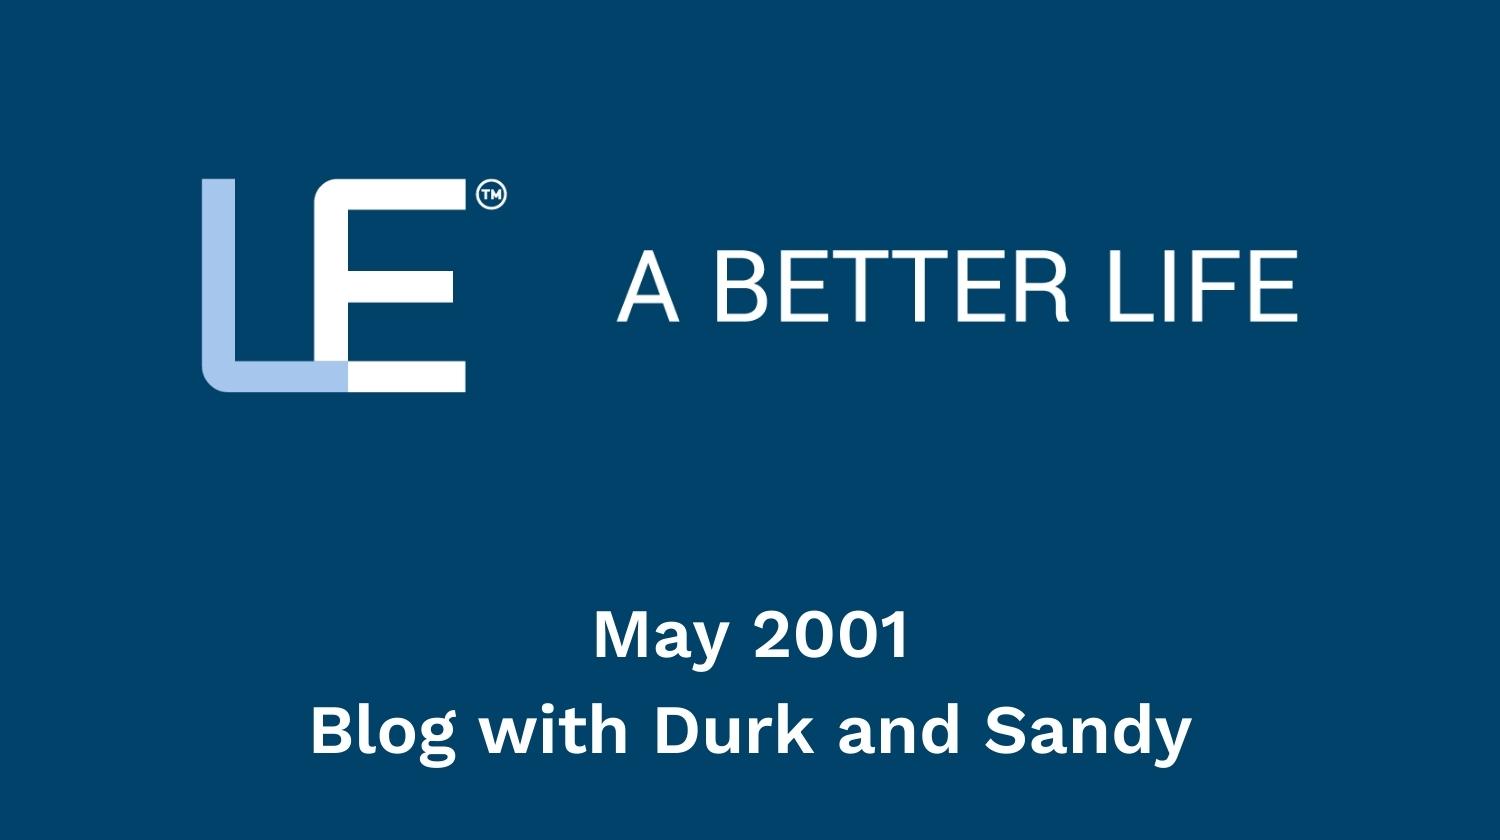 May 2001 Blog with Durk and Sandy